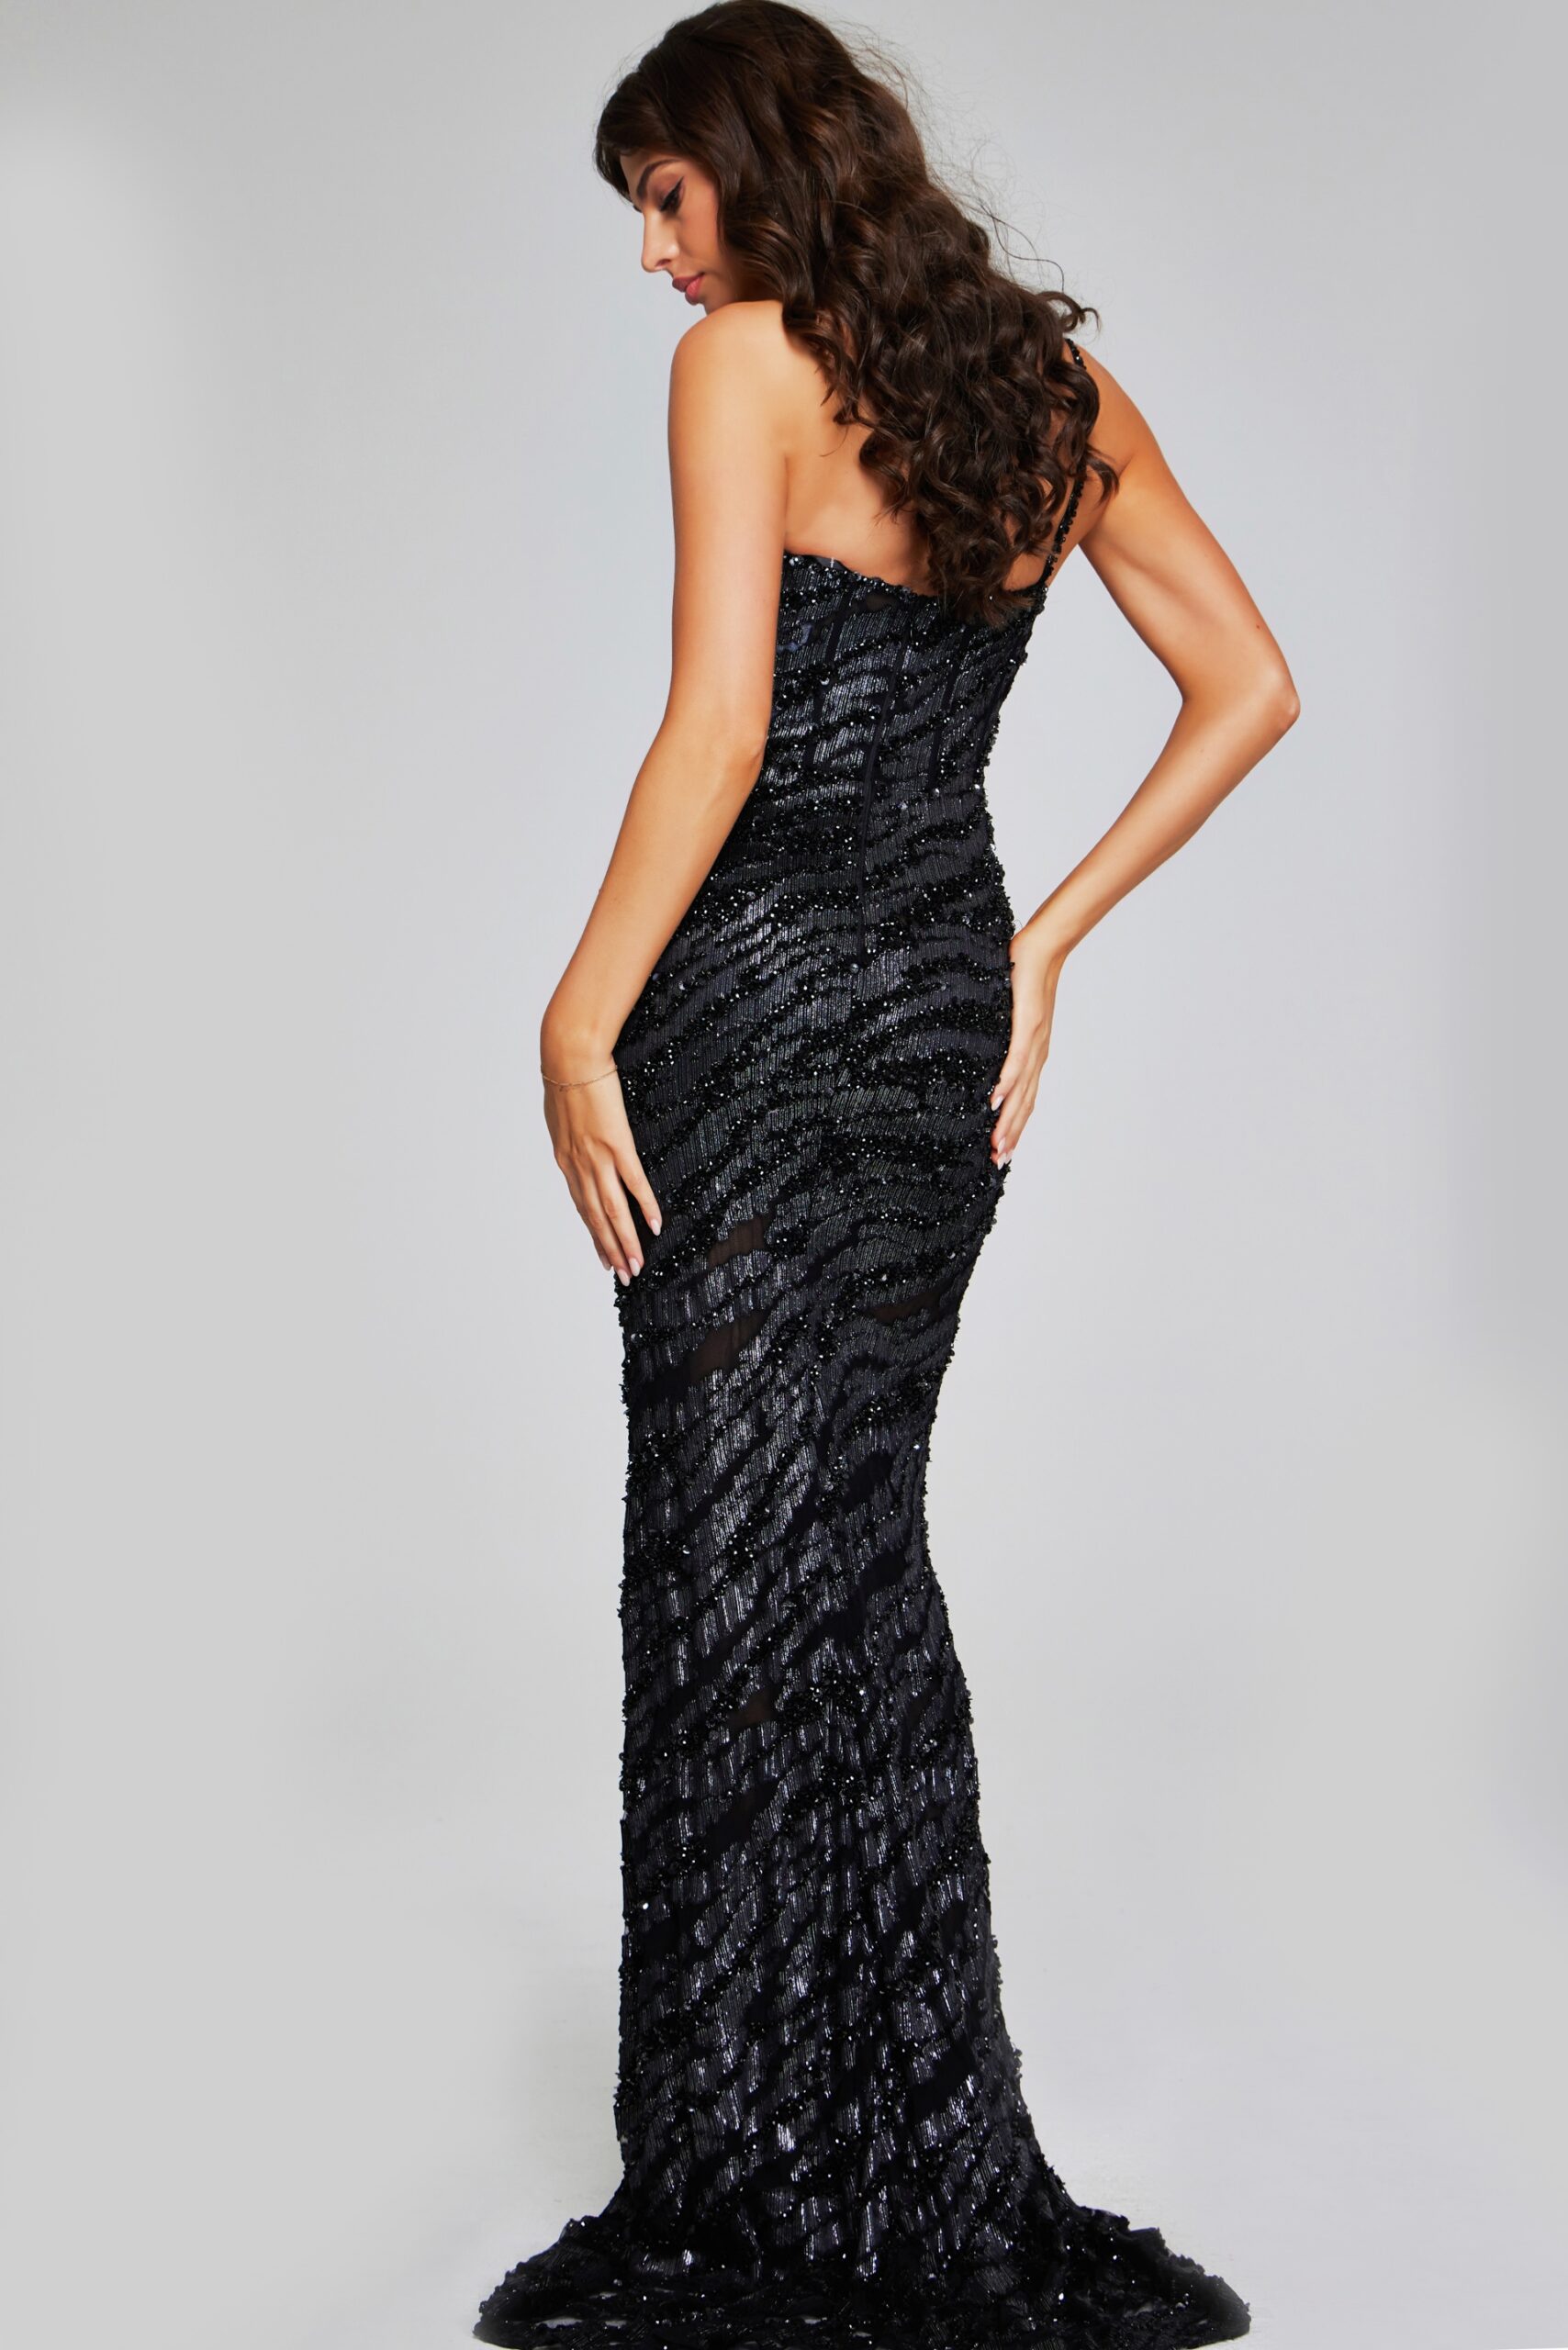 Black One-Shoulder Beaded Gown with Sheer Detailing 40182